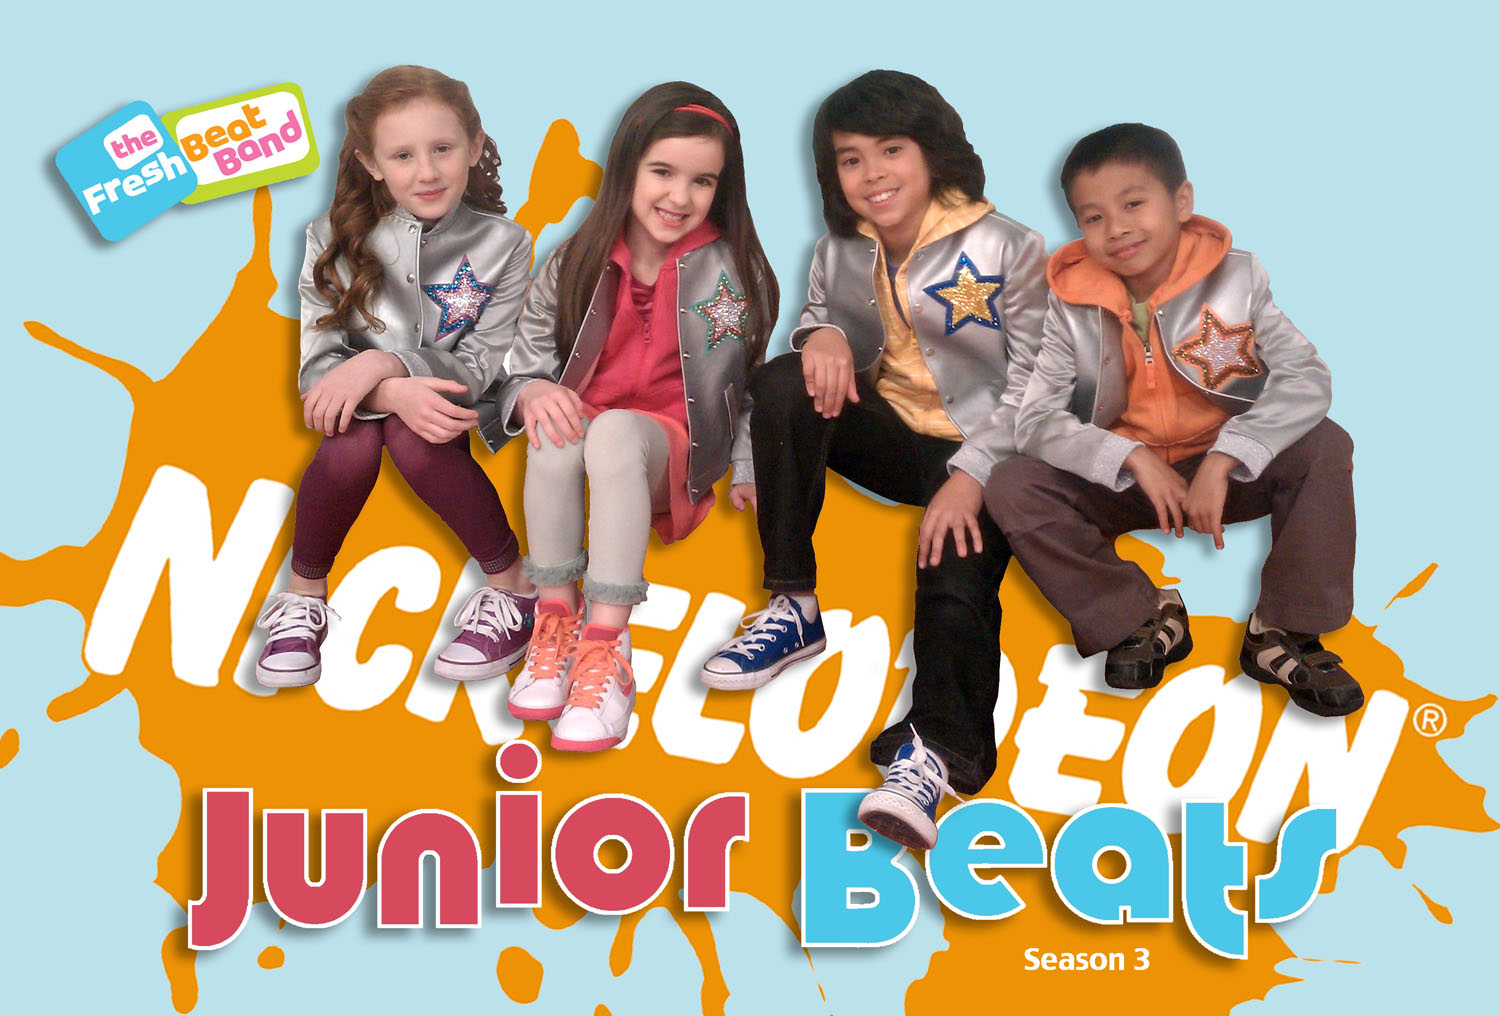 Recurring role on The Fresh Beat Band as Jr. Kiki